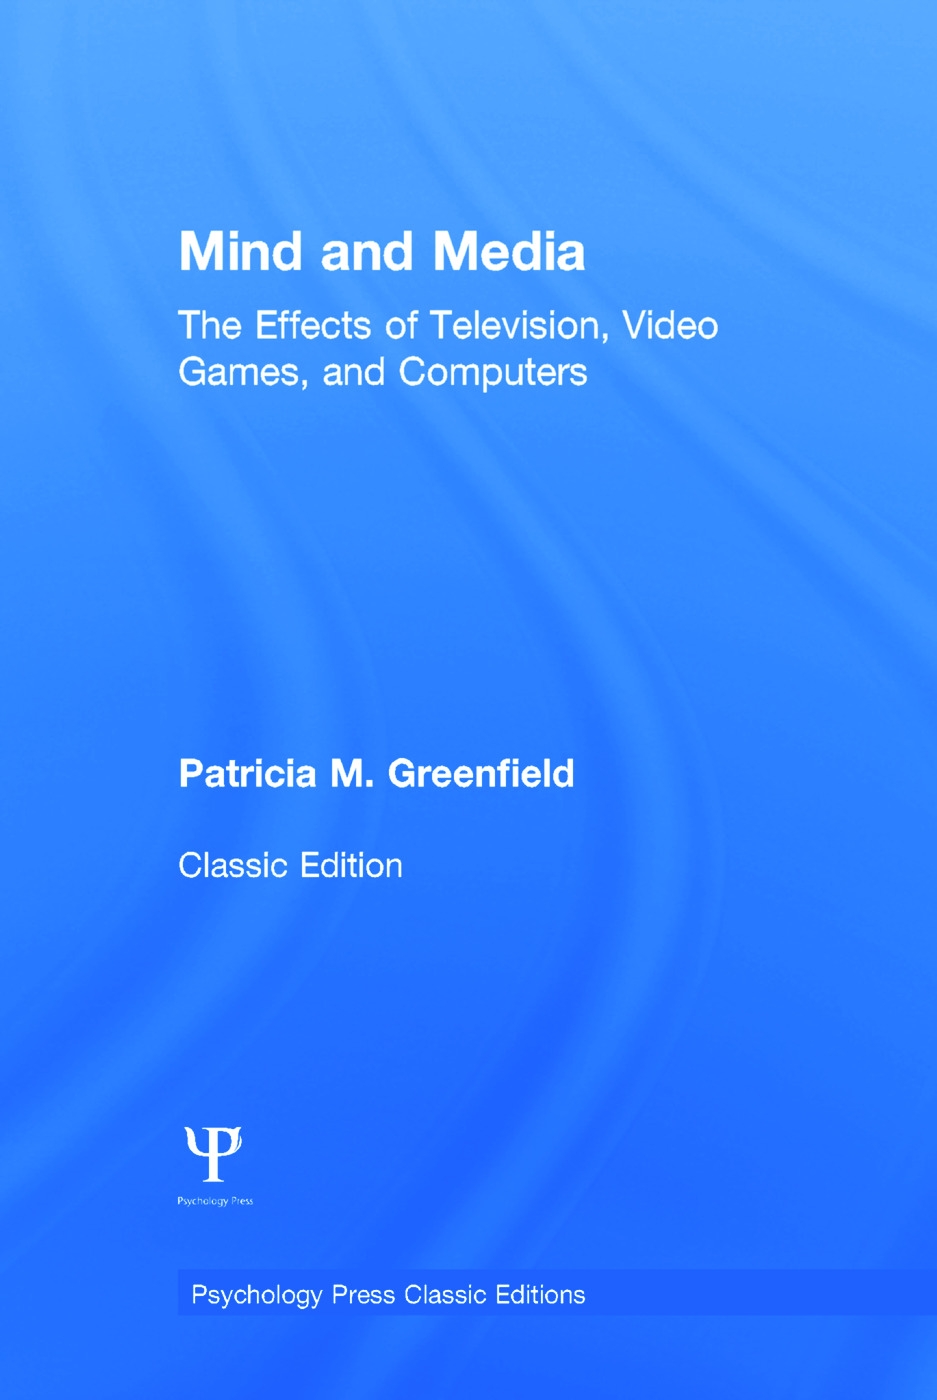 Mind and Media: The Effects of Television, Video Games, and Computers